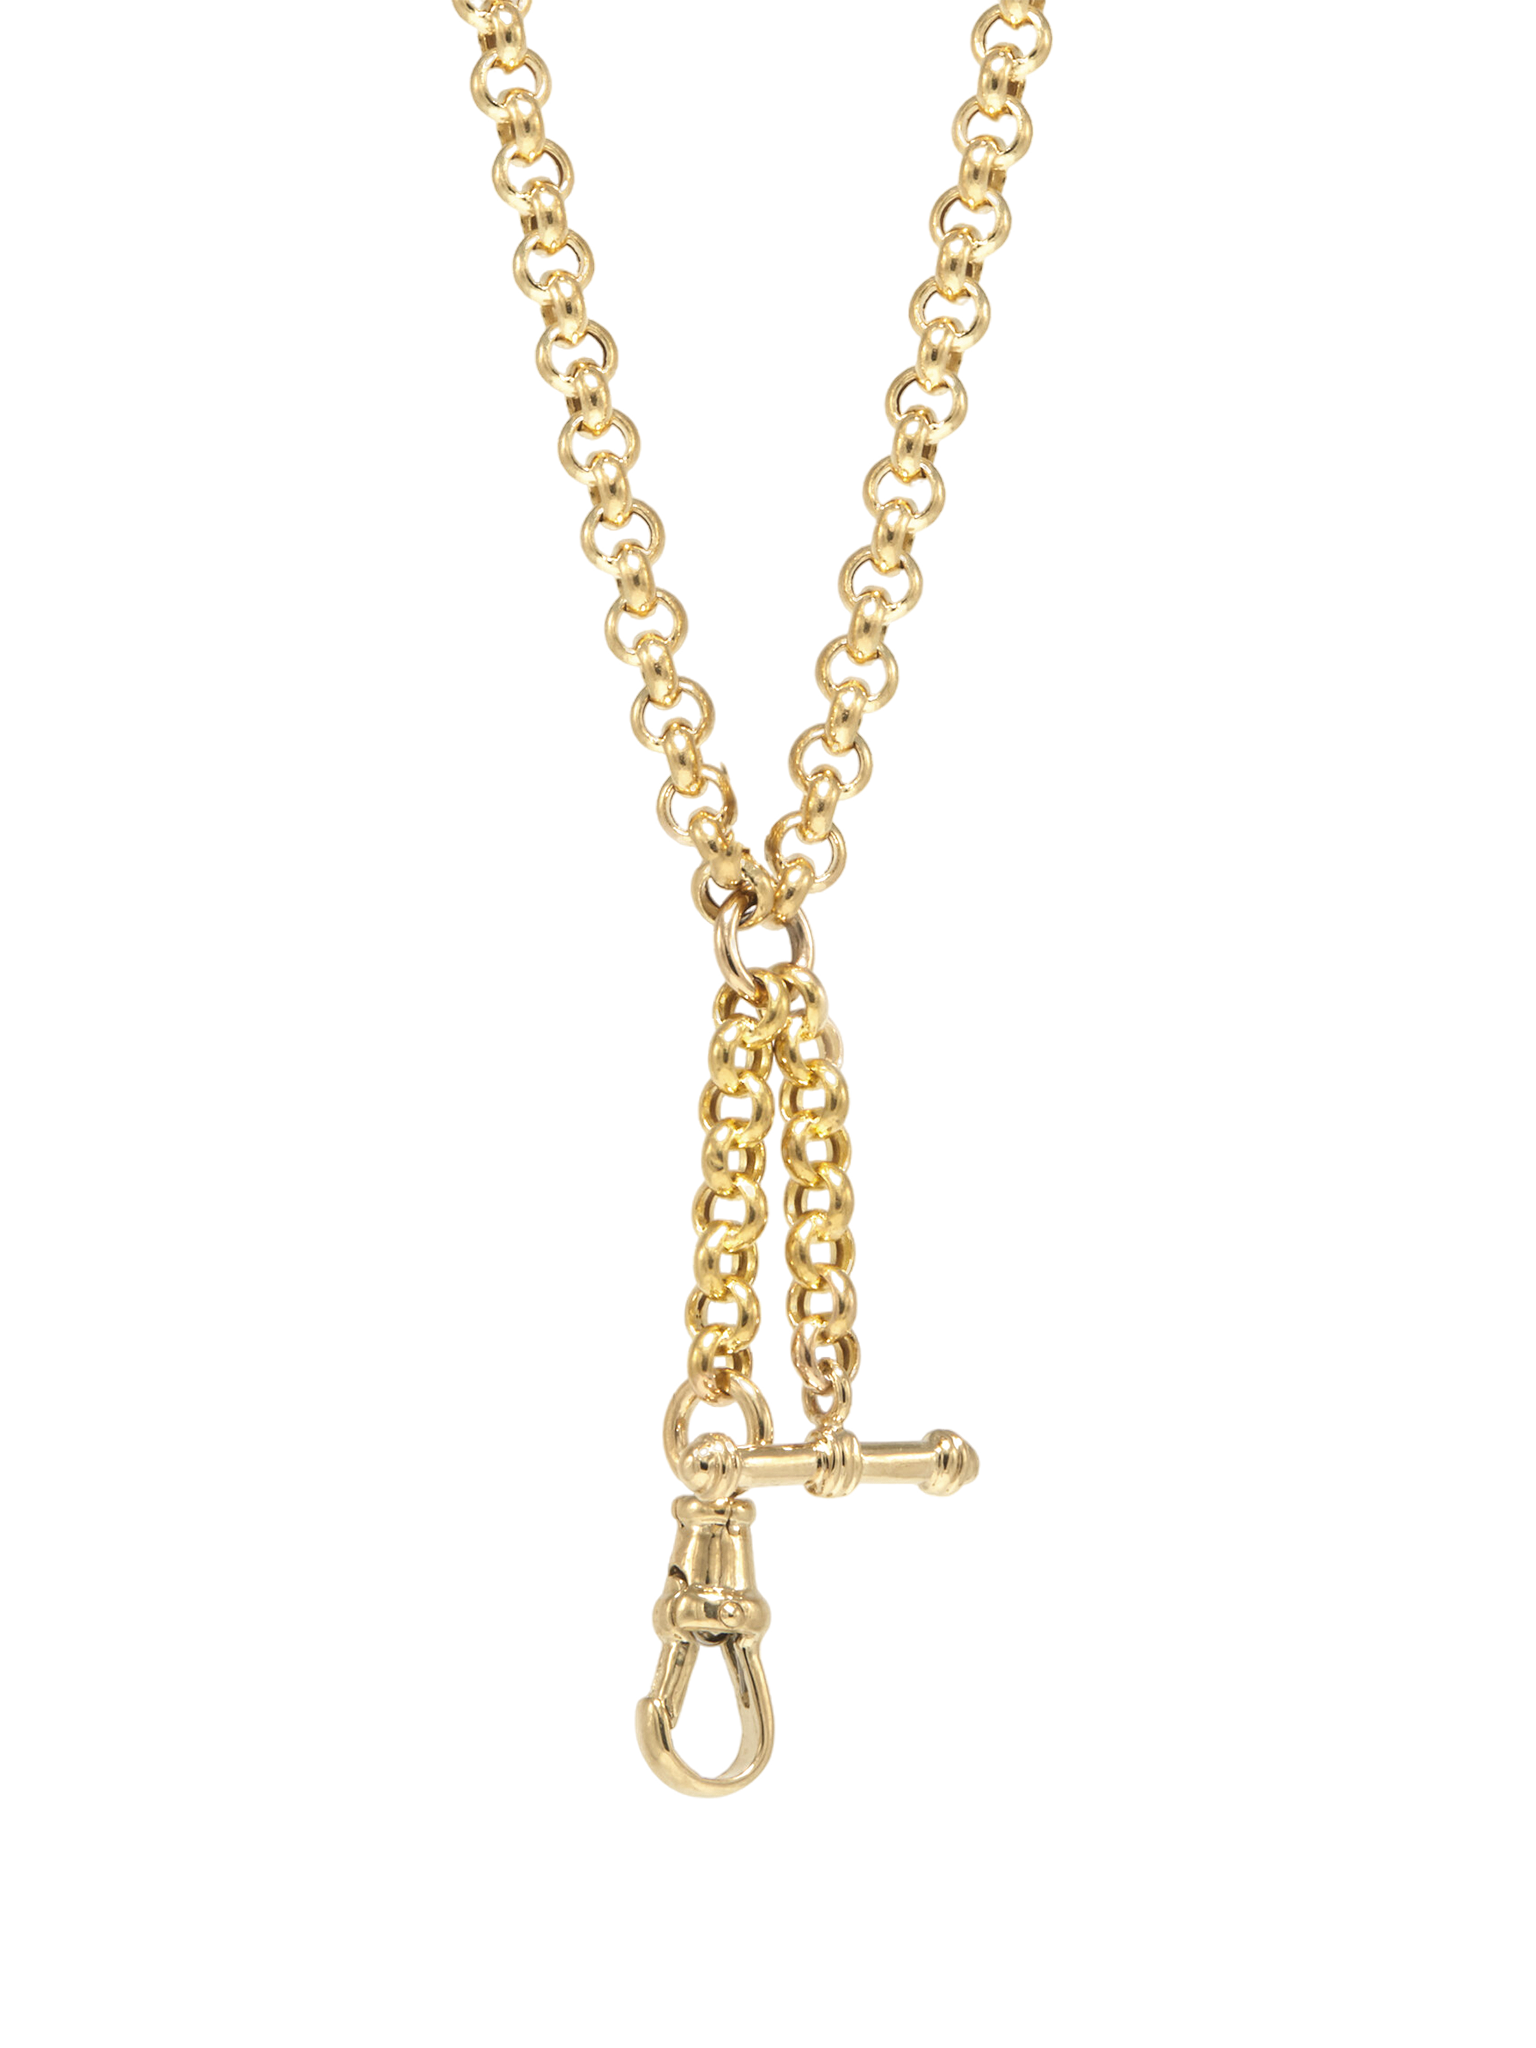 French 18 ct yellow gold albert chain necklace. | House of Magic Treasures